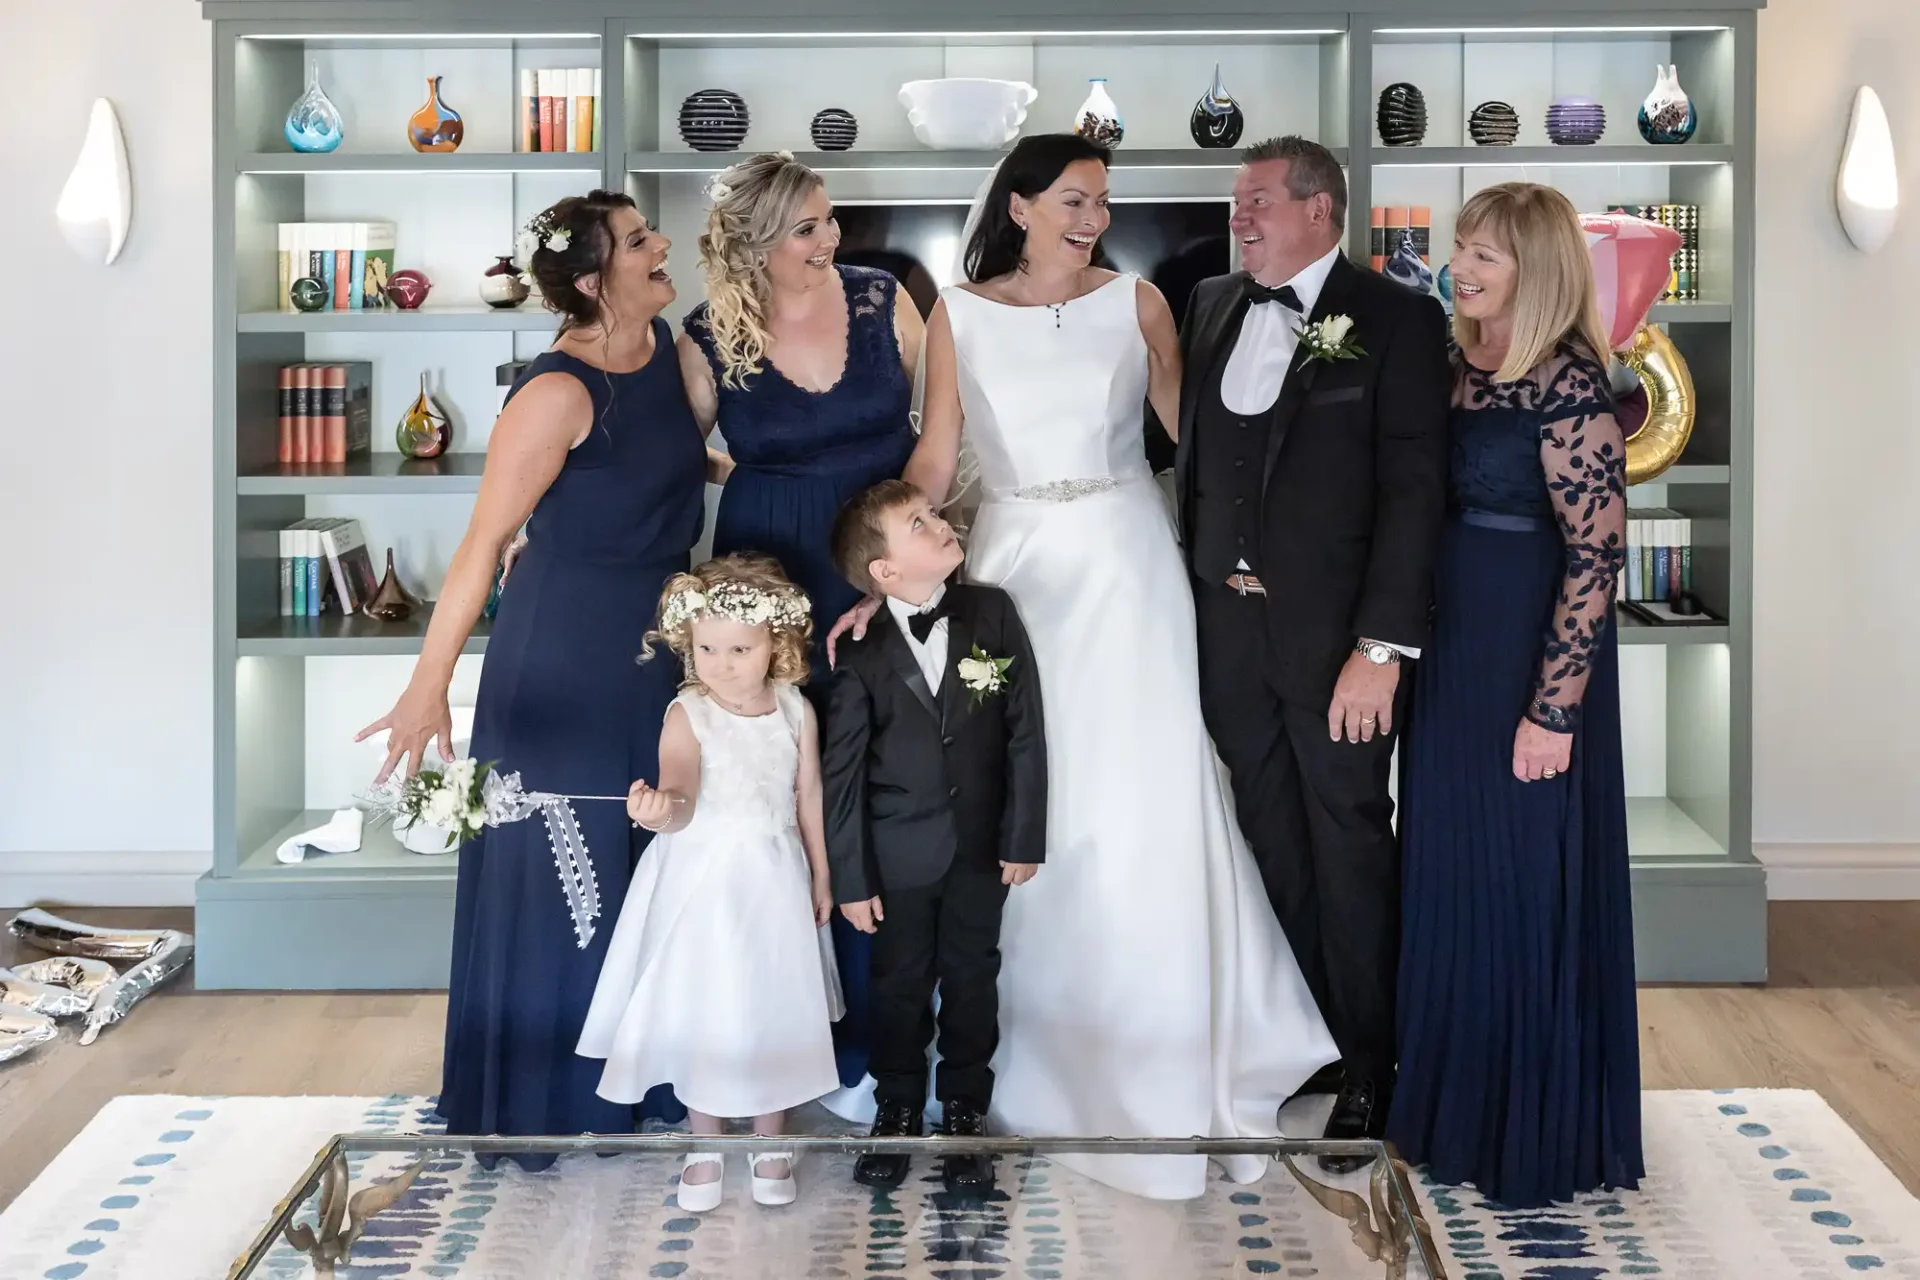 A happy wedding party inside a living room with a bride, groom, three adult women, and two children in formal attire, all smiling, in front of a shelved backdrop with decorative items.